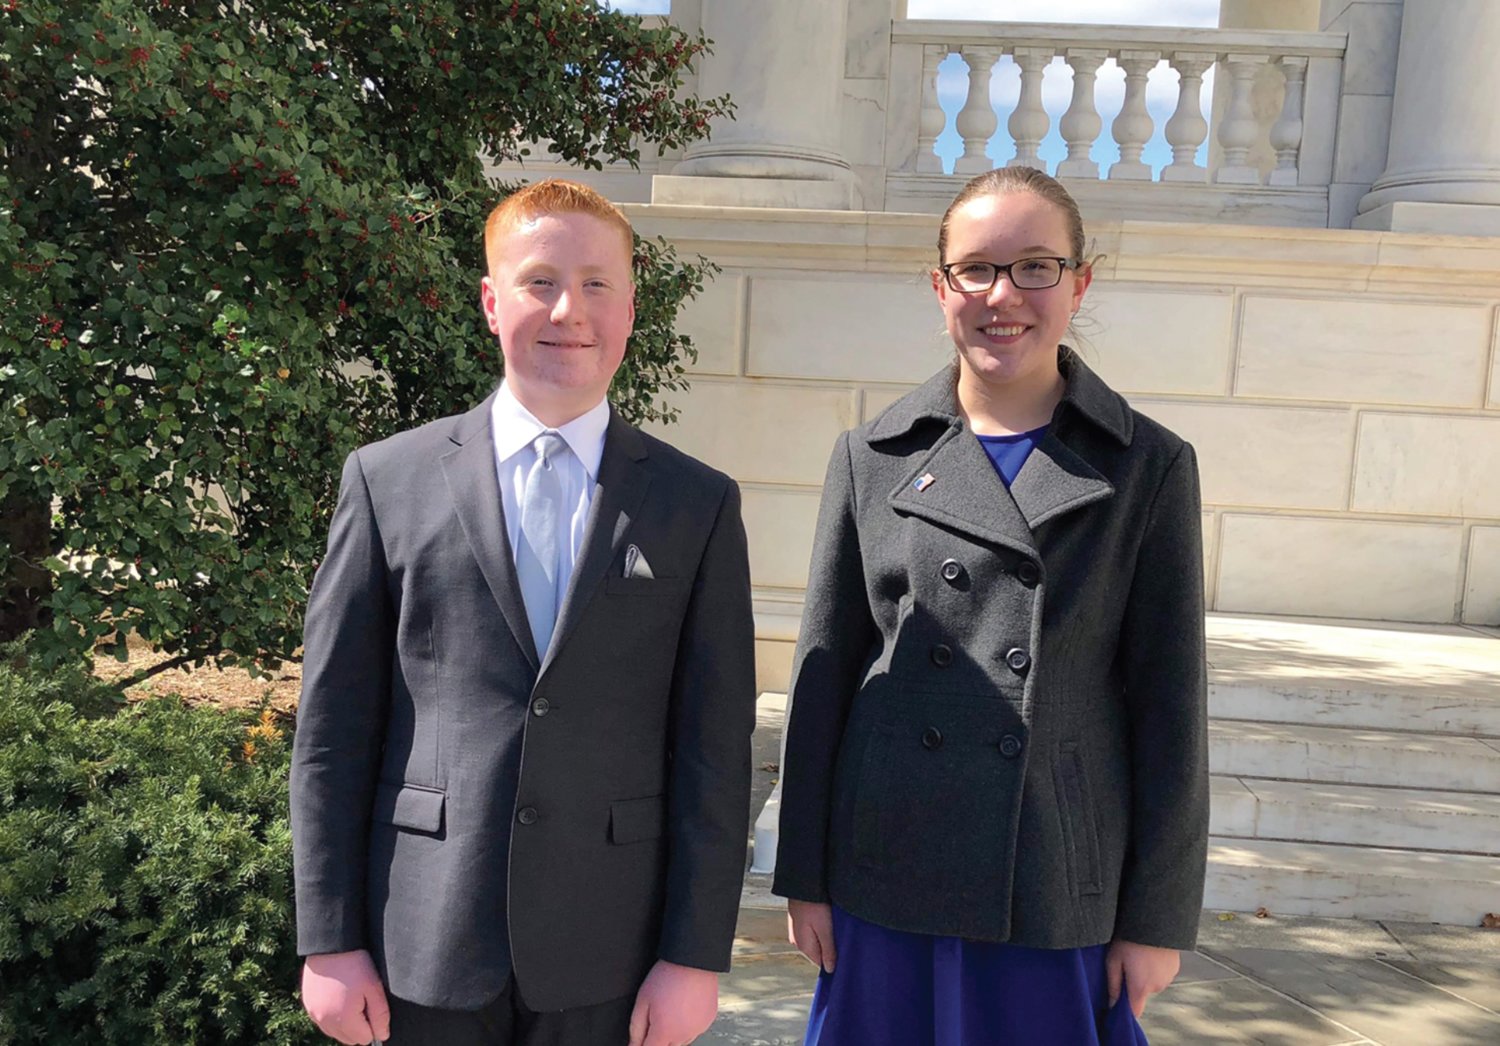 Lucy Wilcox, 14, and Asher Adams, 13, were selected out of about a dozen eighth graders at Centralia Christian School who went on a trip to the Washington, D.C., area.